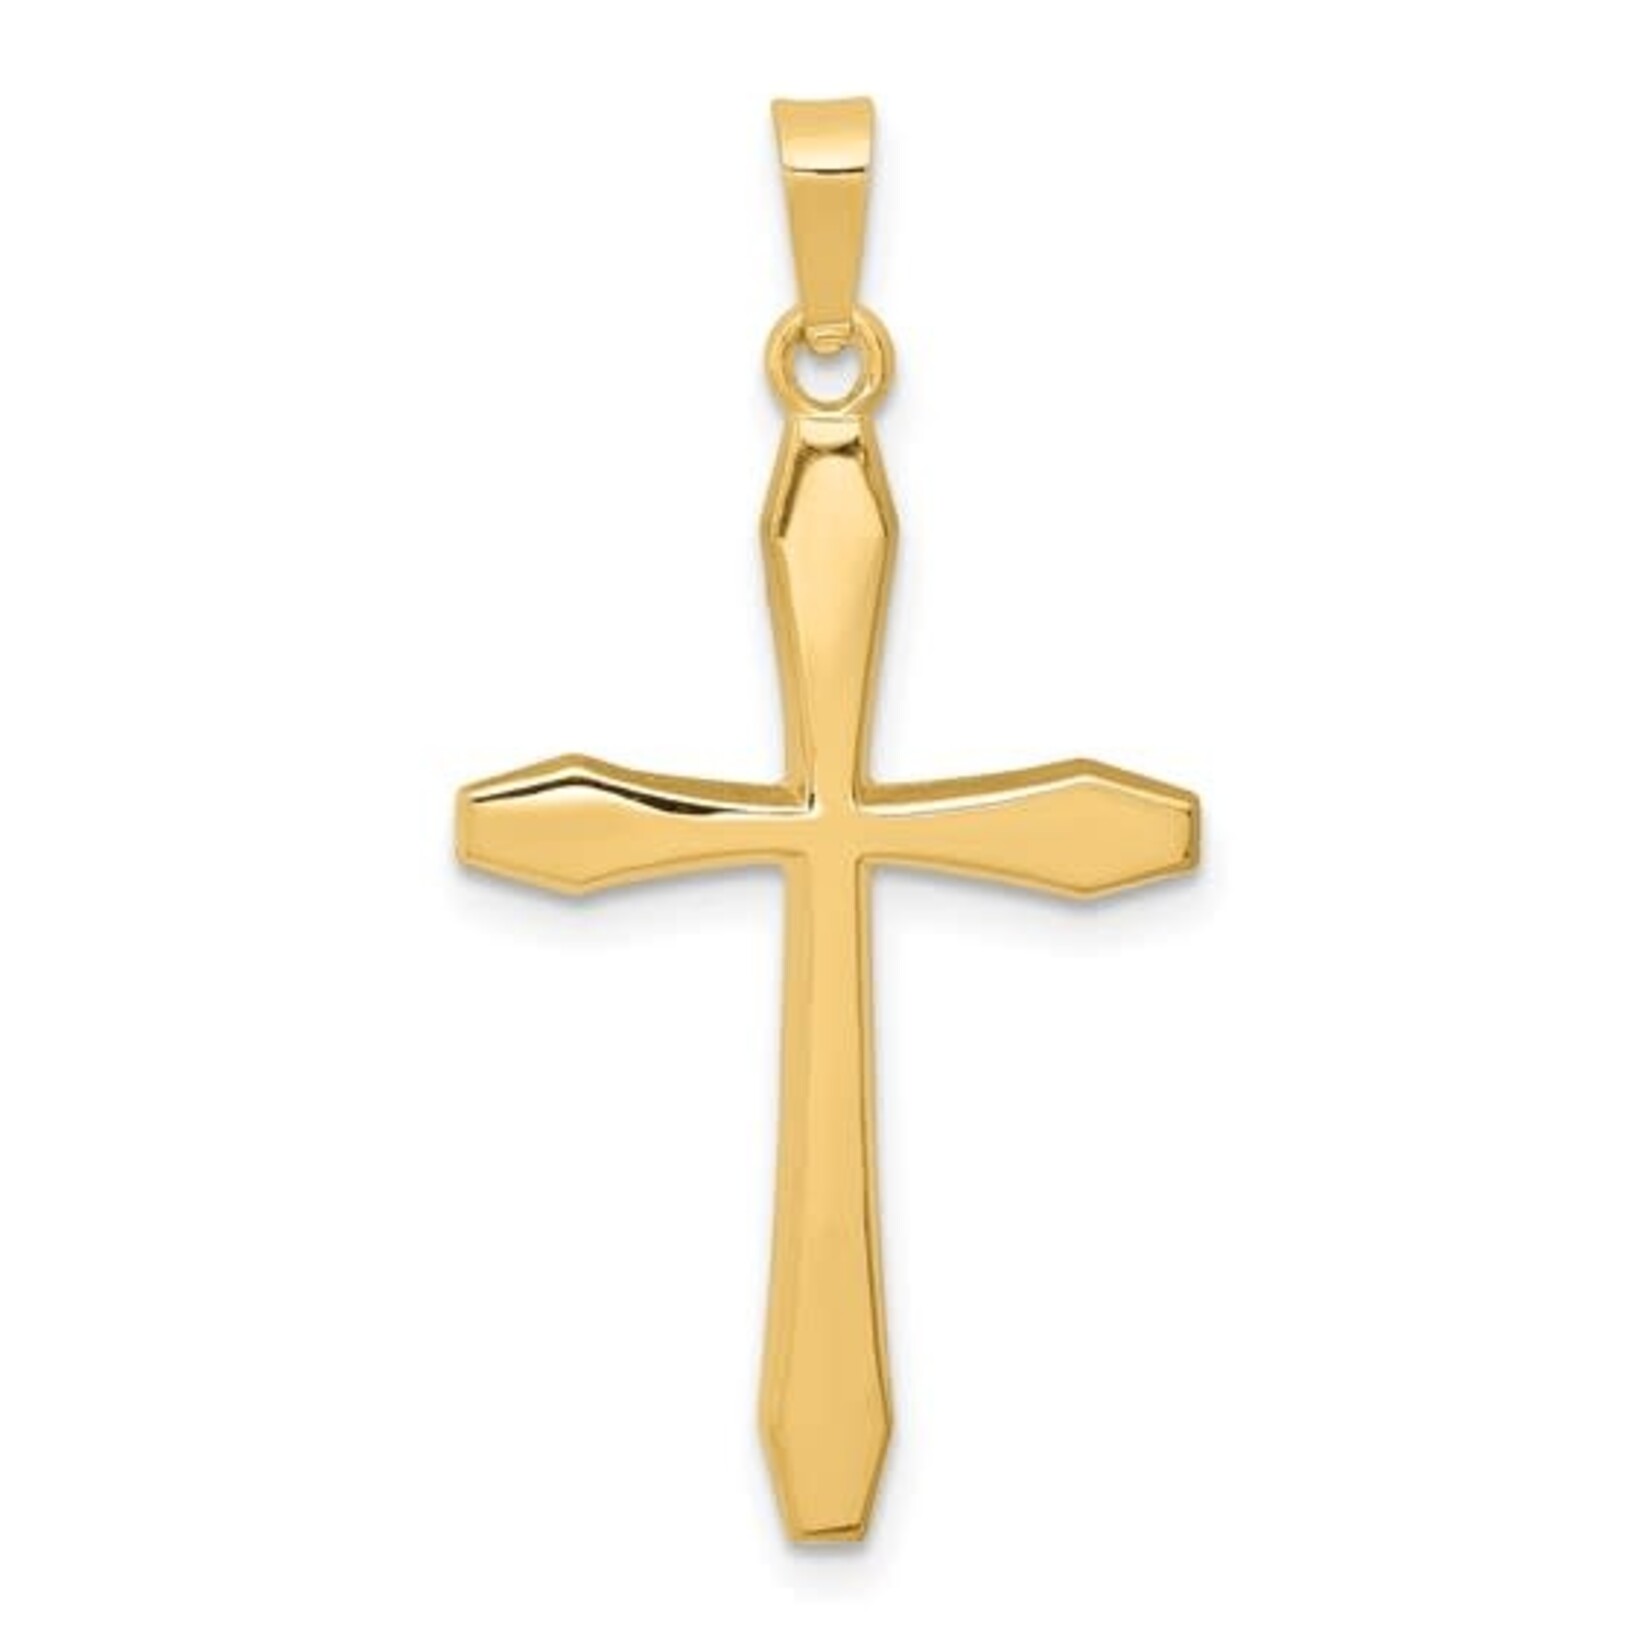 Quality Gold 14k Yellow Gold Men's Polished Cross Pendant